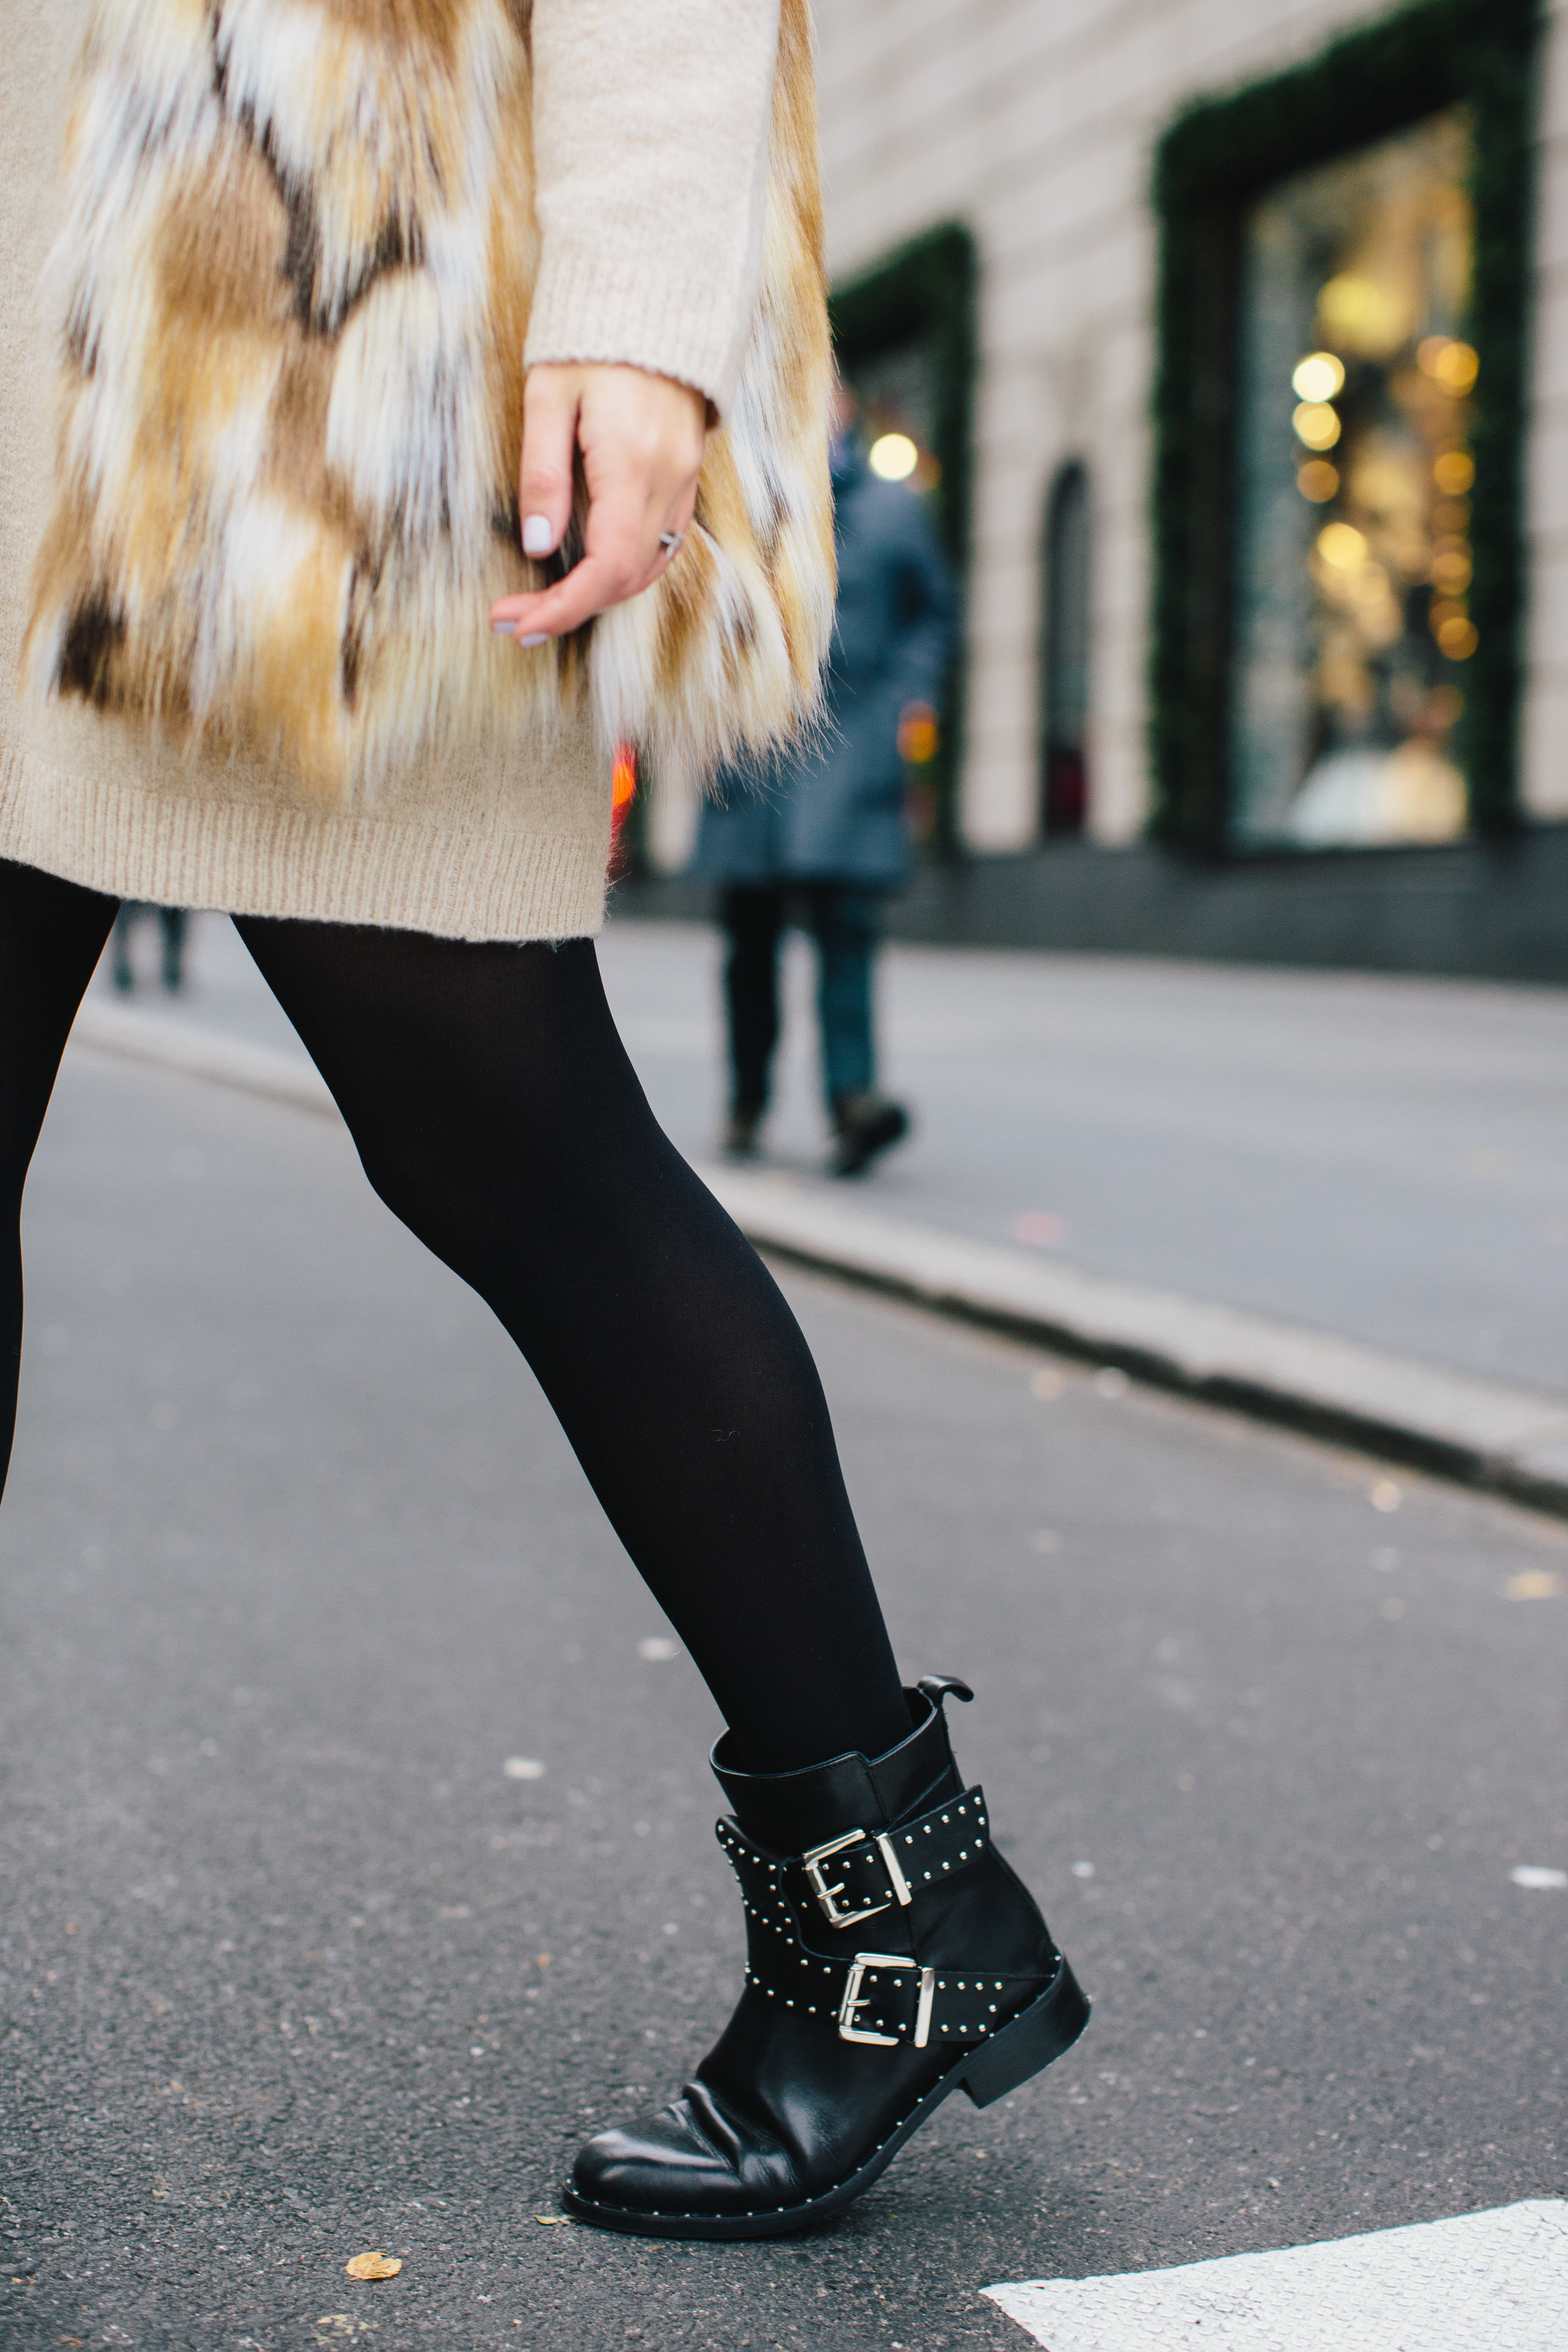 Calico Fur Vest Black Buckle Booties 5 Bad Habits To Ditch In The New Year Esther Santer Fashion Blog NYC Street Style Blogger Outfit OOTD Trendy DSW Shoes Women Girl Holiday Season Window Shopping New York City  Tights Beige Sweater Dress Winter Cozy.JPG